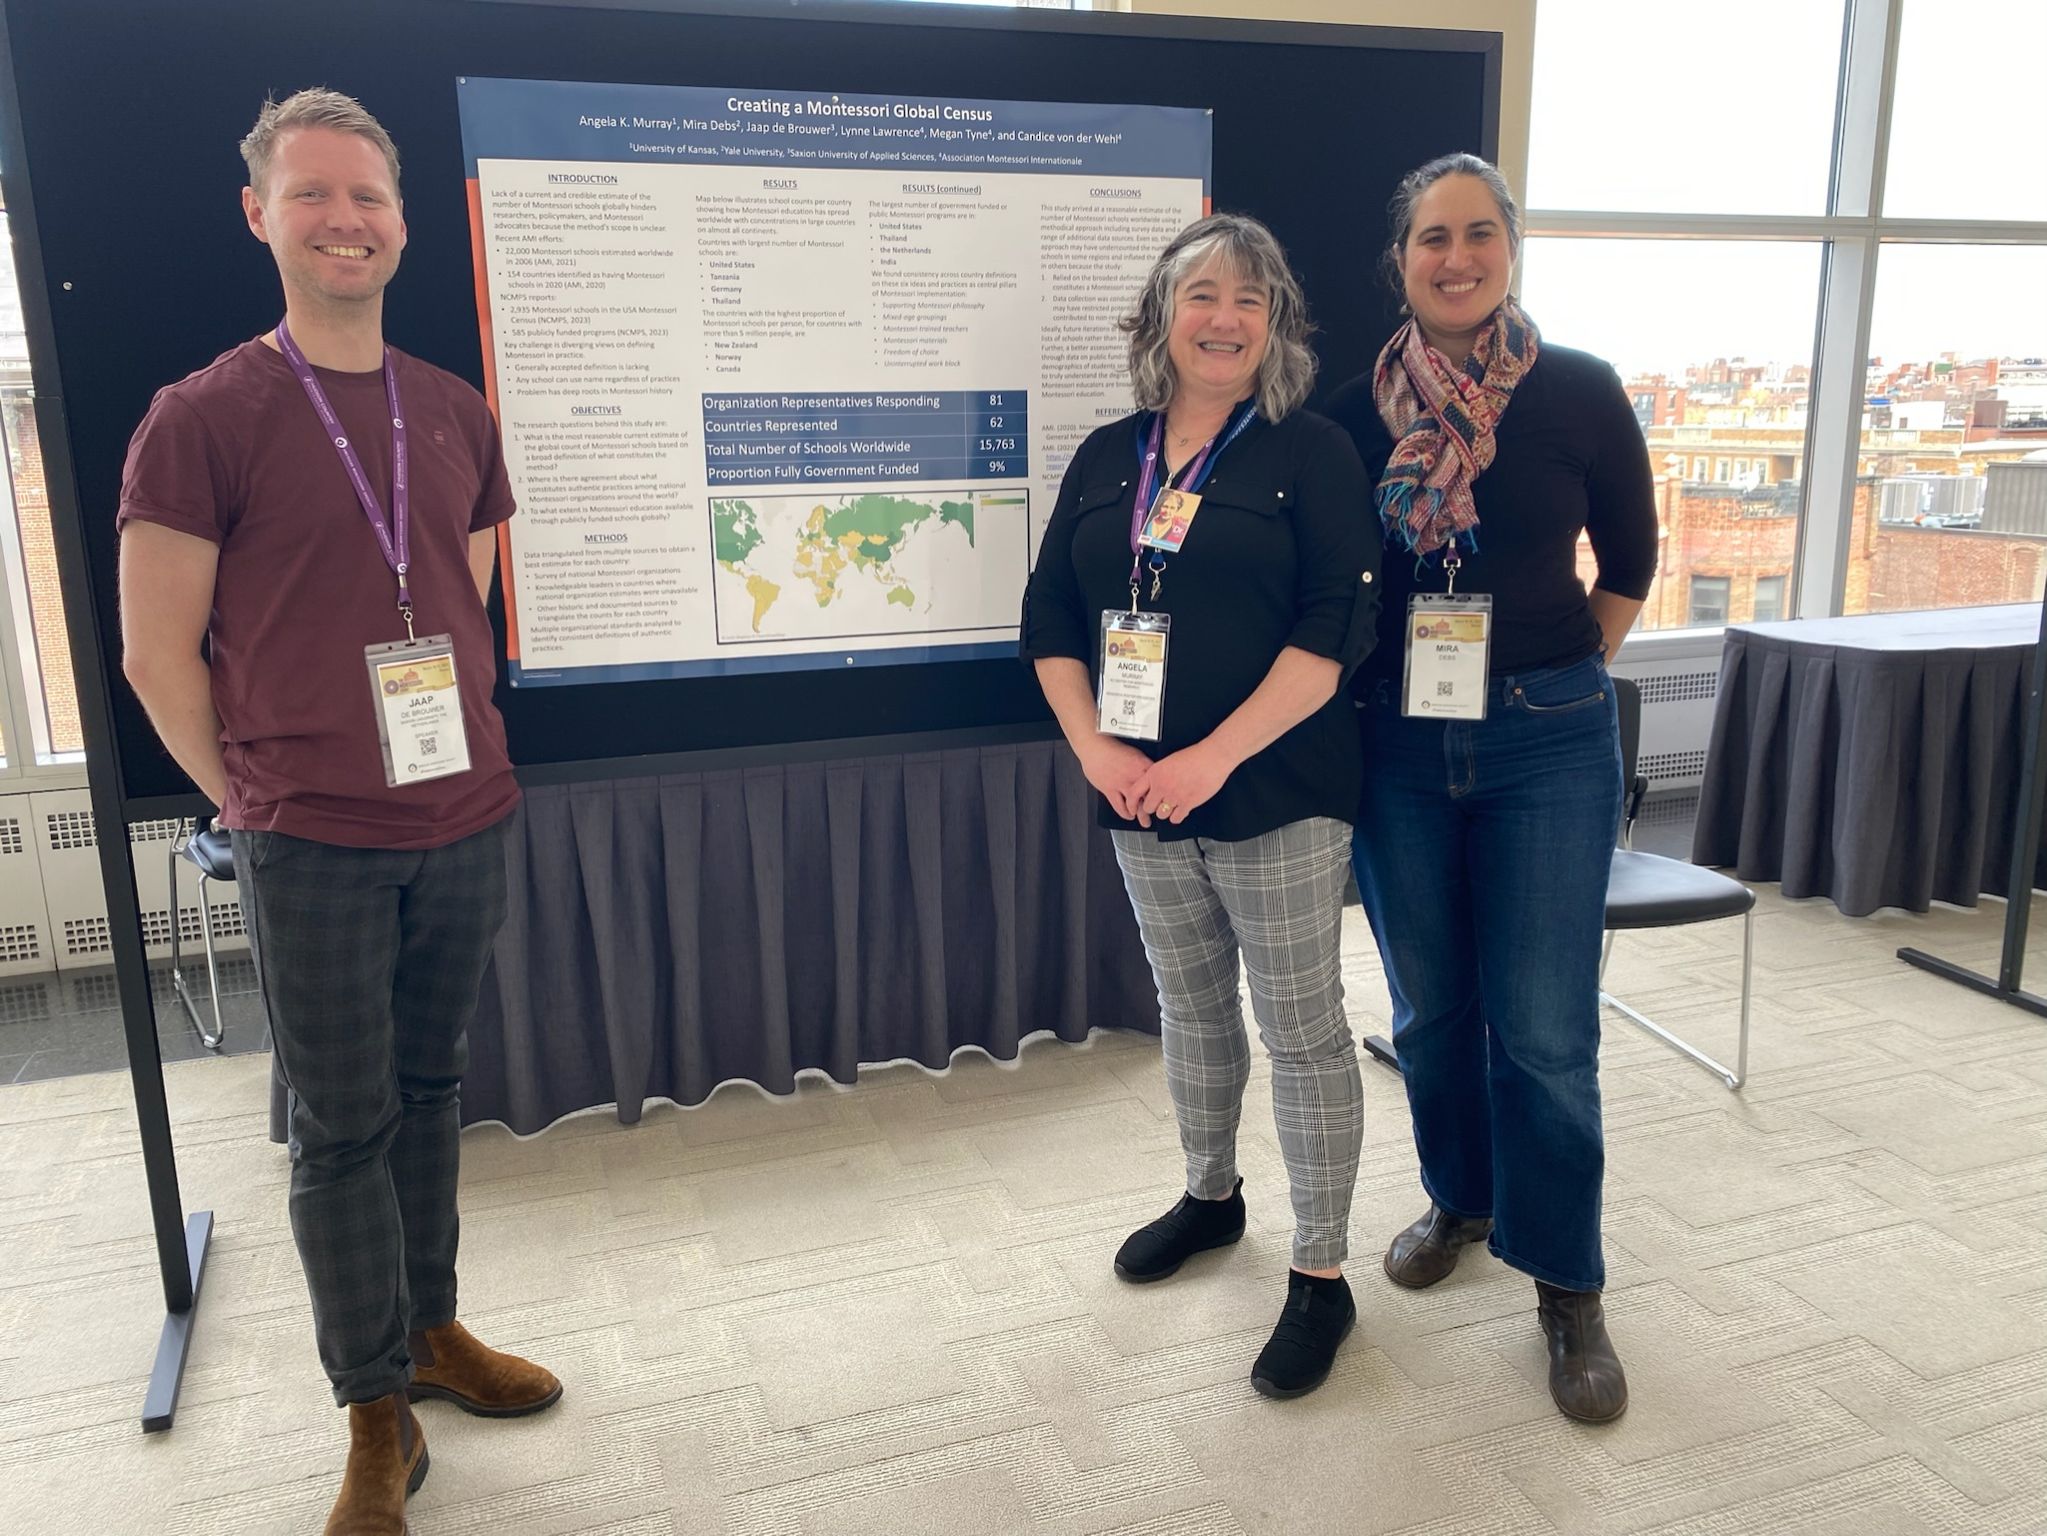 CLARA Director Angela Murray (center) at the AMS Montessori Event to present a research poster on the Global Census research project with colleagues Mira Lutgendorf Debs from Yale University and Jaap de Brouwer from Saxion University, The Netherlands.